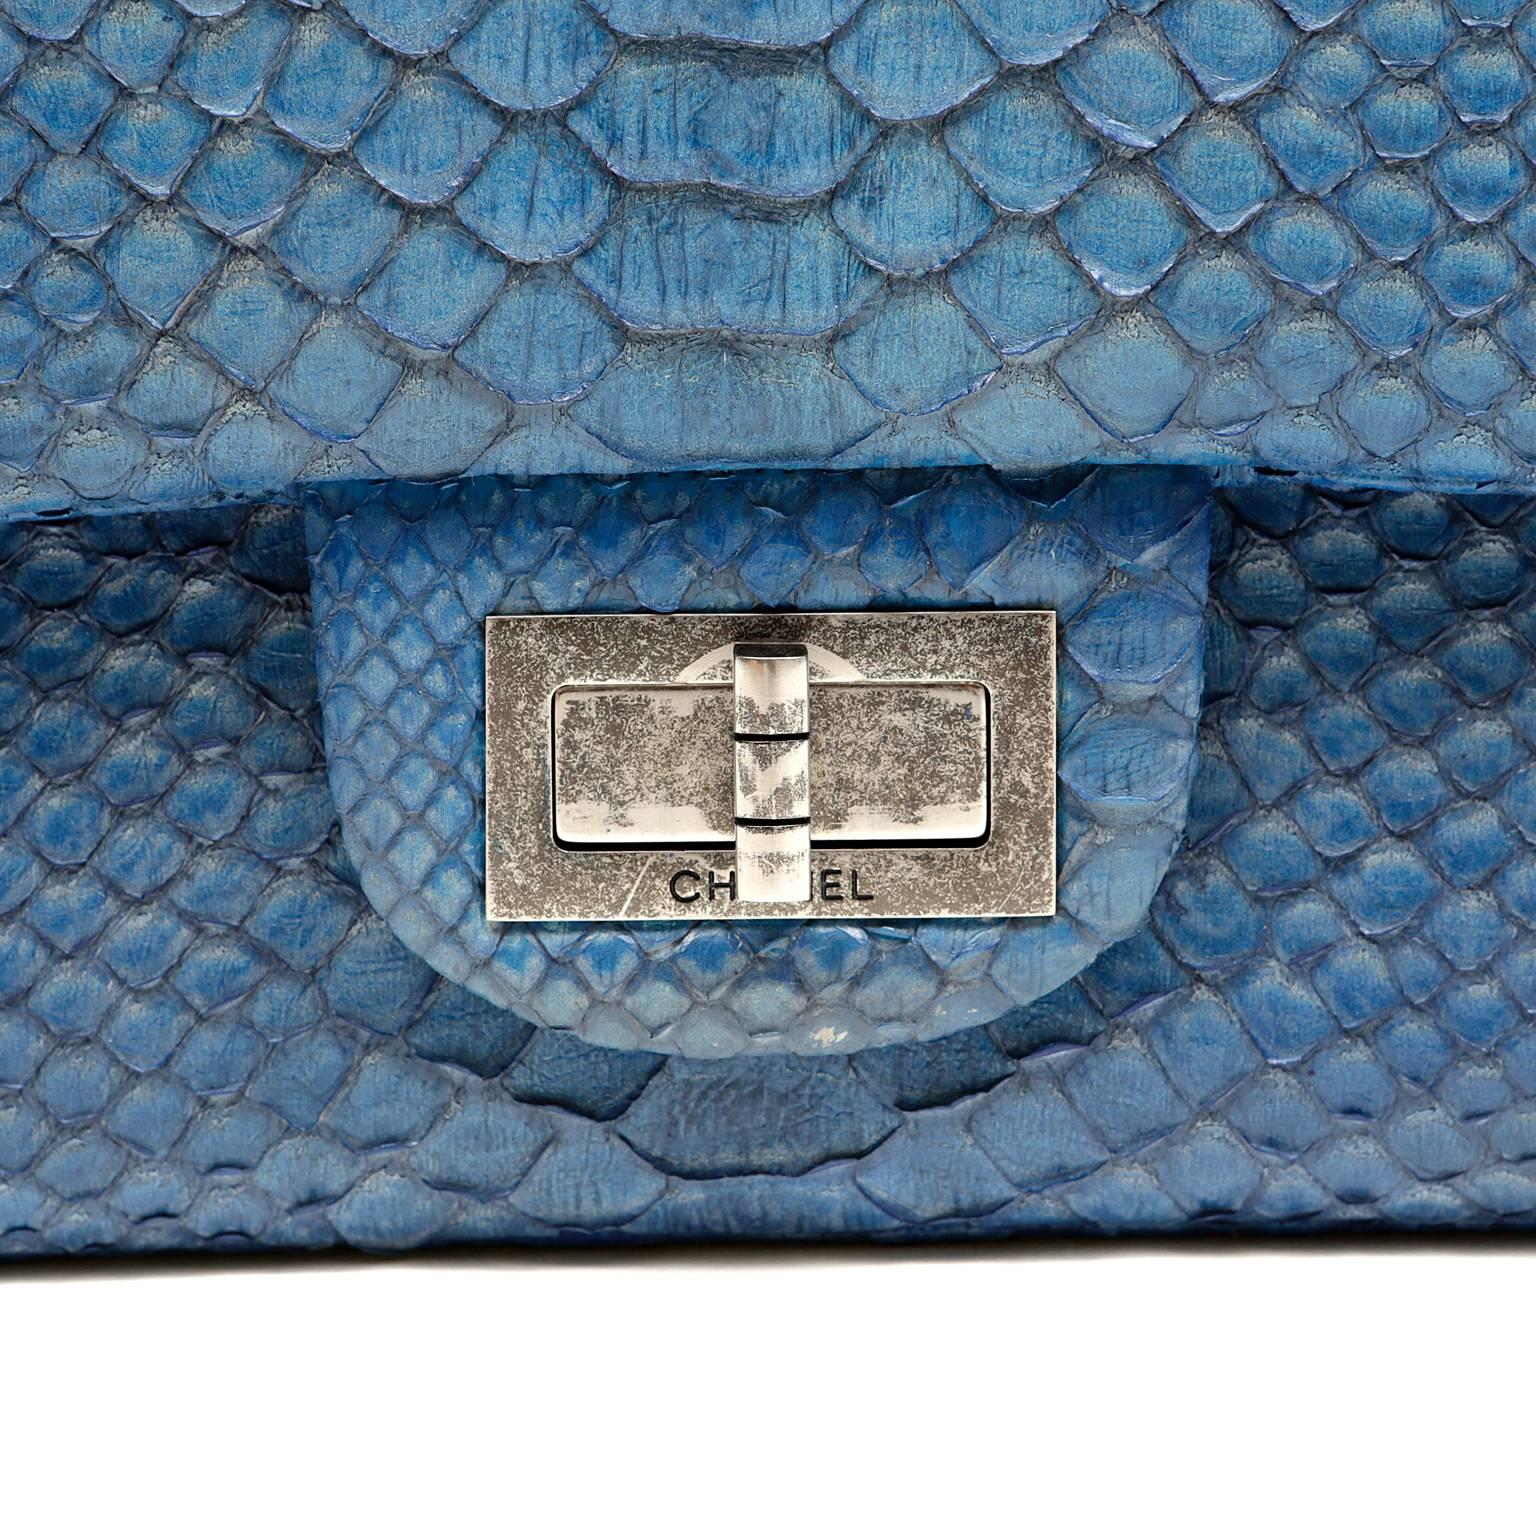 Chanel Blue Grey Python Maxi Shoulder Bag In Excellent Condition For Sale In Malibu, CA